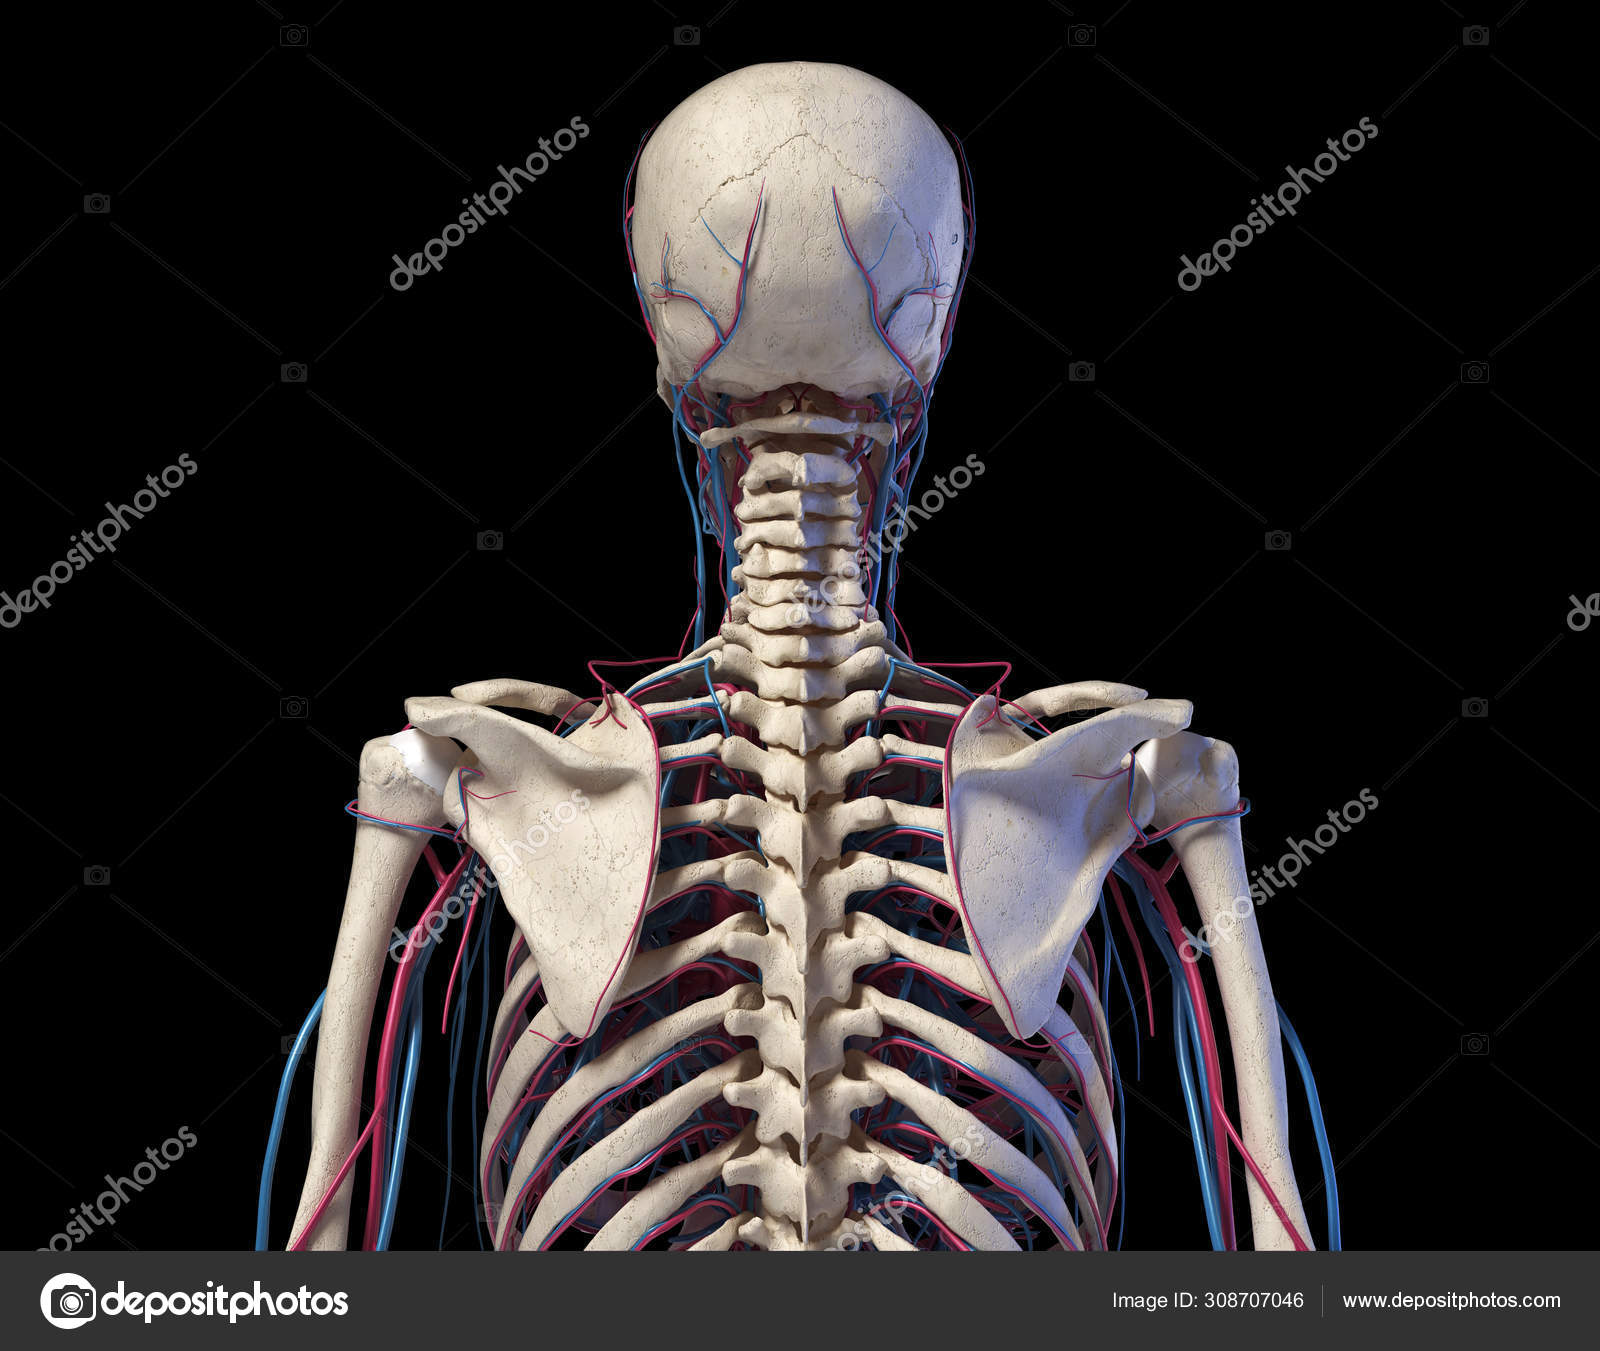 Human Torso Anatomy Skeleton With Veins And Arteries Back View Stock Photo Image By C Pixelchaos 308707046